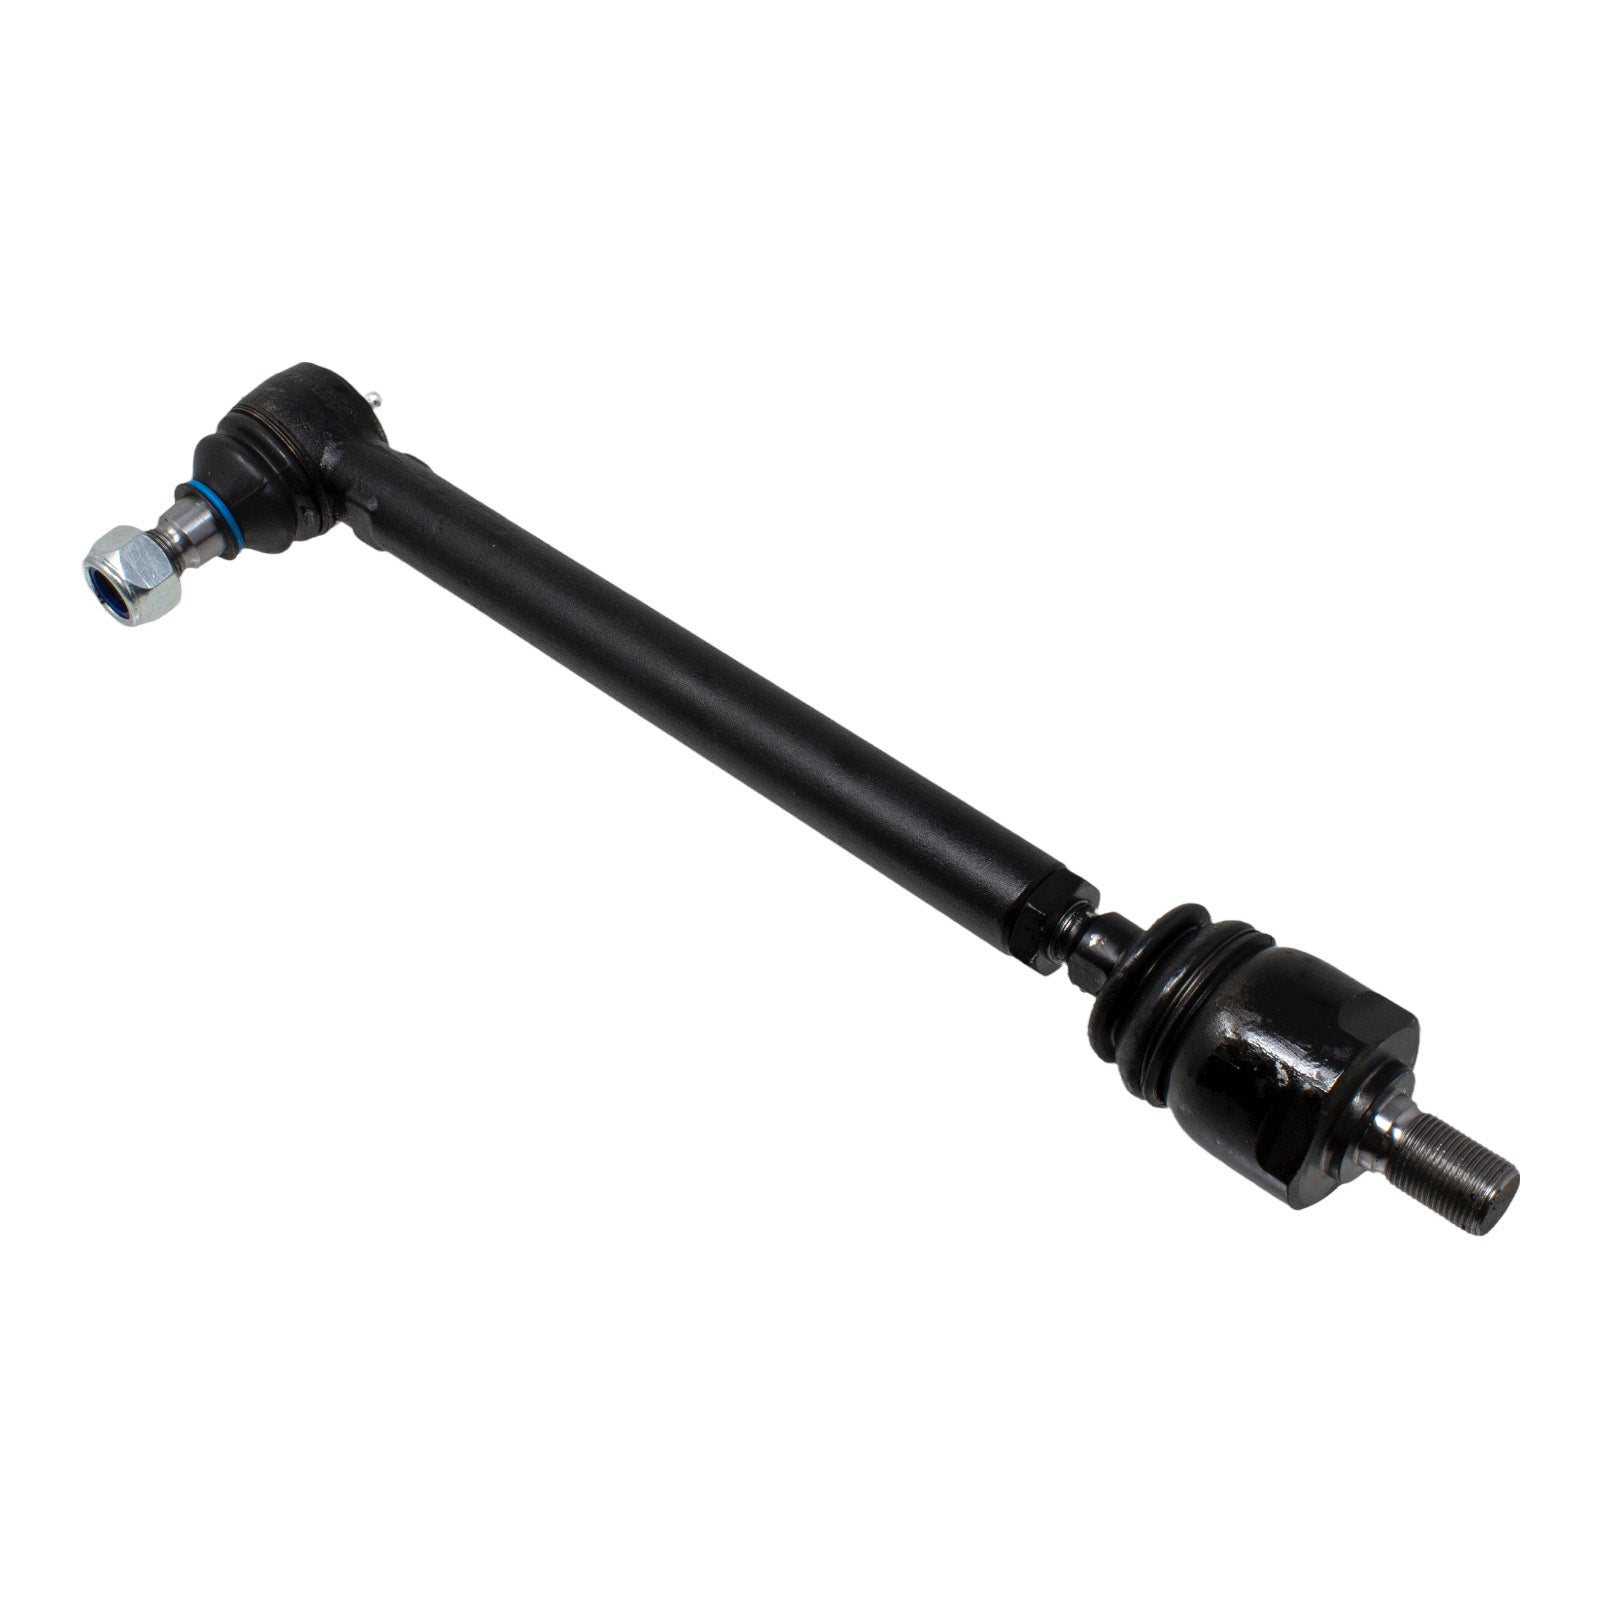 Duraforce 87710157, Tie Rod Assembly For Case